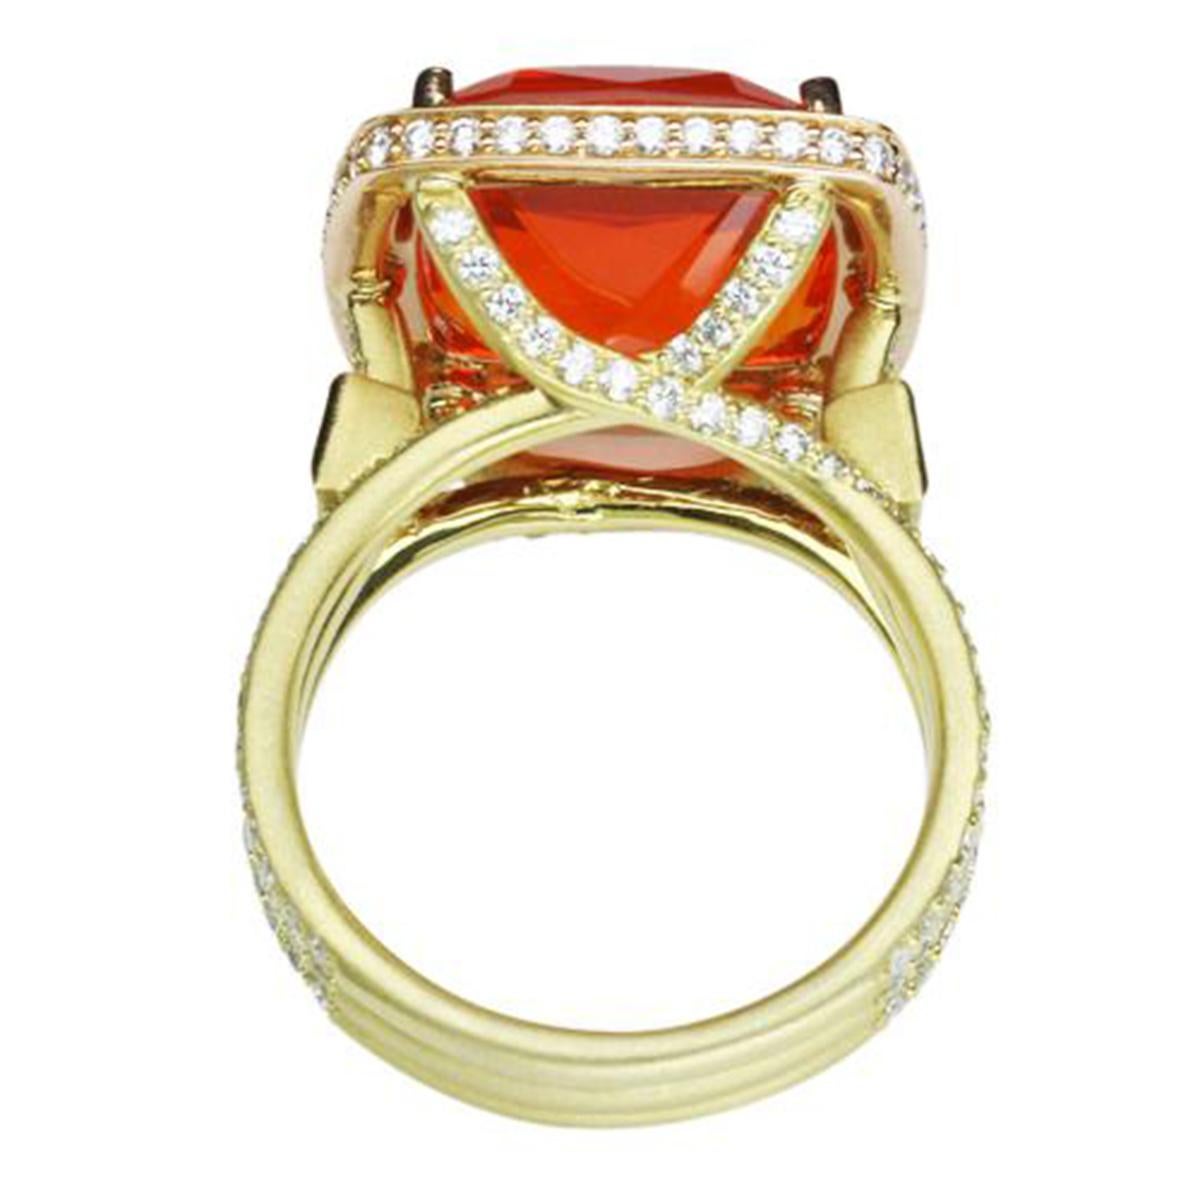 Elegant & finely detailed Ring, center set with a securely nestled 10.45 Cushion Cut Intense Orange Fire Opal, 13.5mm x 13.5mm; clarity internally flawless (IF), no treatment; surrounded by and enhanced on shank with micro-set Brilliant full cut